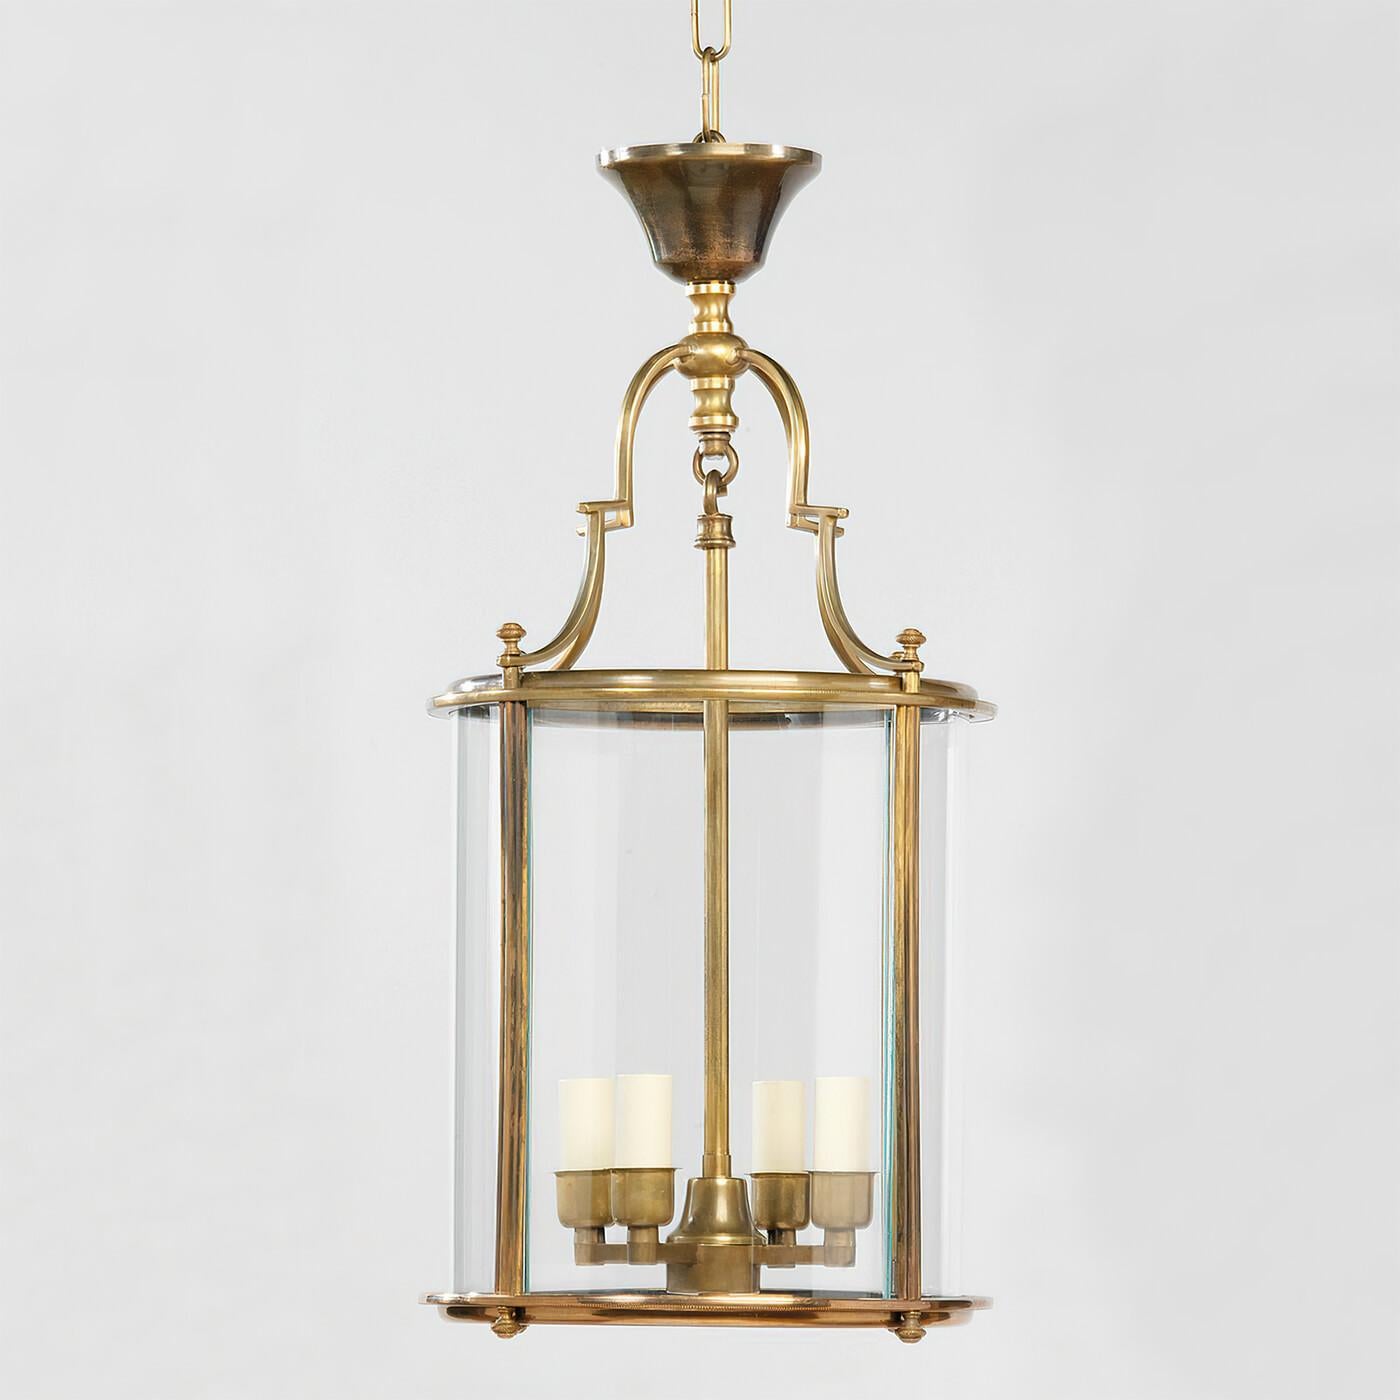 Simple in style and inspired by a 17th-century antique, this lantern features fine decorative details, from the crown at the top, to the finials on its underside. Handcrafted from brass and glass and is beautifully cast

Dimensions: 11